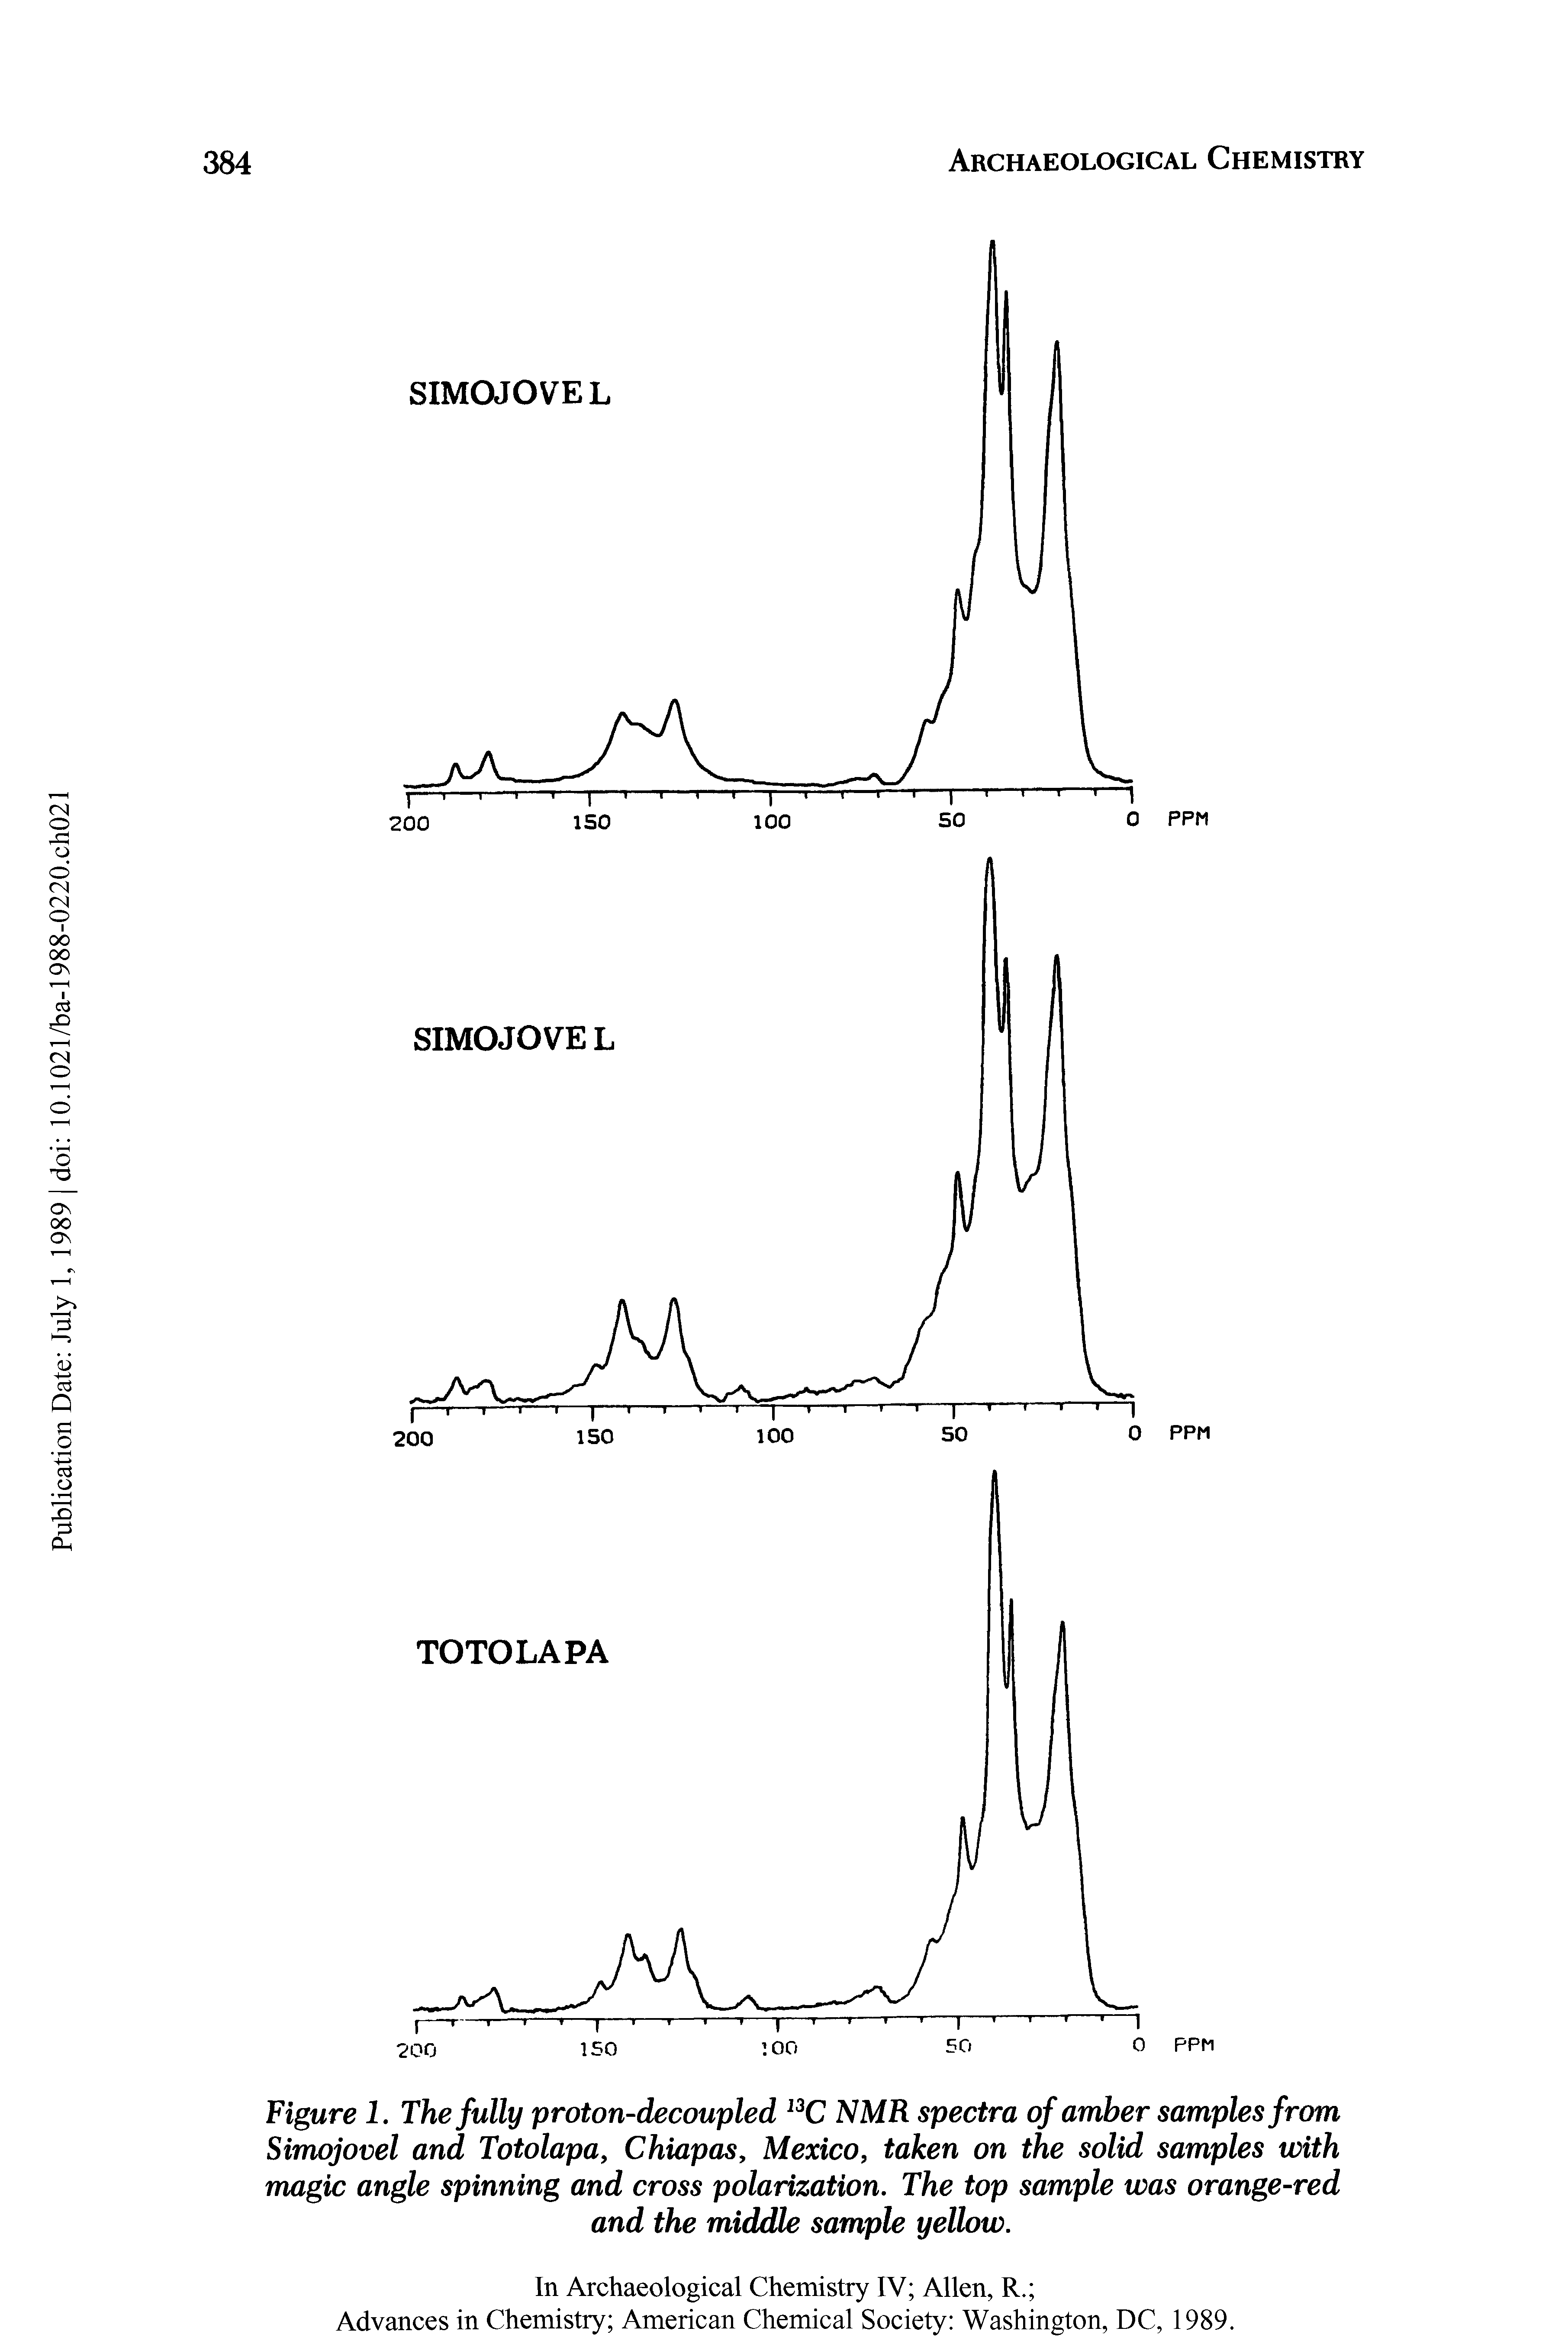 Figure 1. The fully proton-decoupled 13C NMR spectra of amber samples from Simojovel and Totolapa, Chiapas, Mexico, taken on the solid samples with magic angle spinning and cross polarization. The top sample was orange-red and the middle sample yellow.